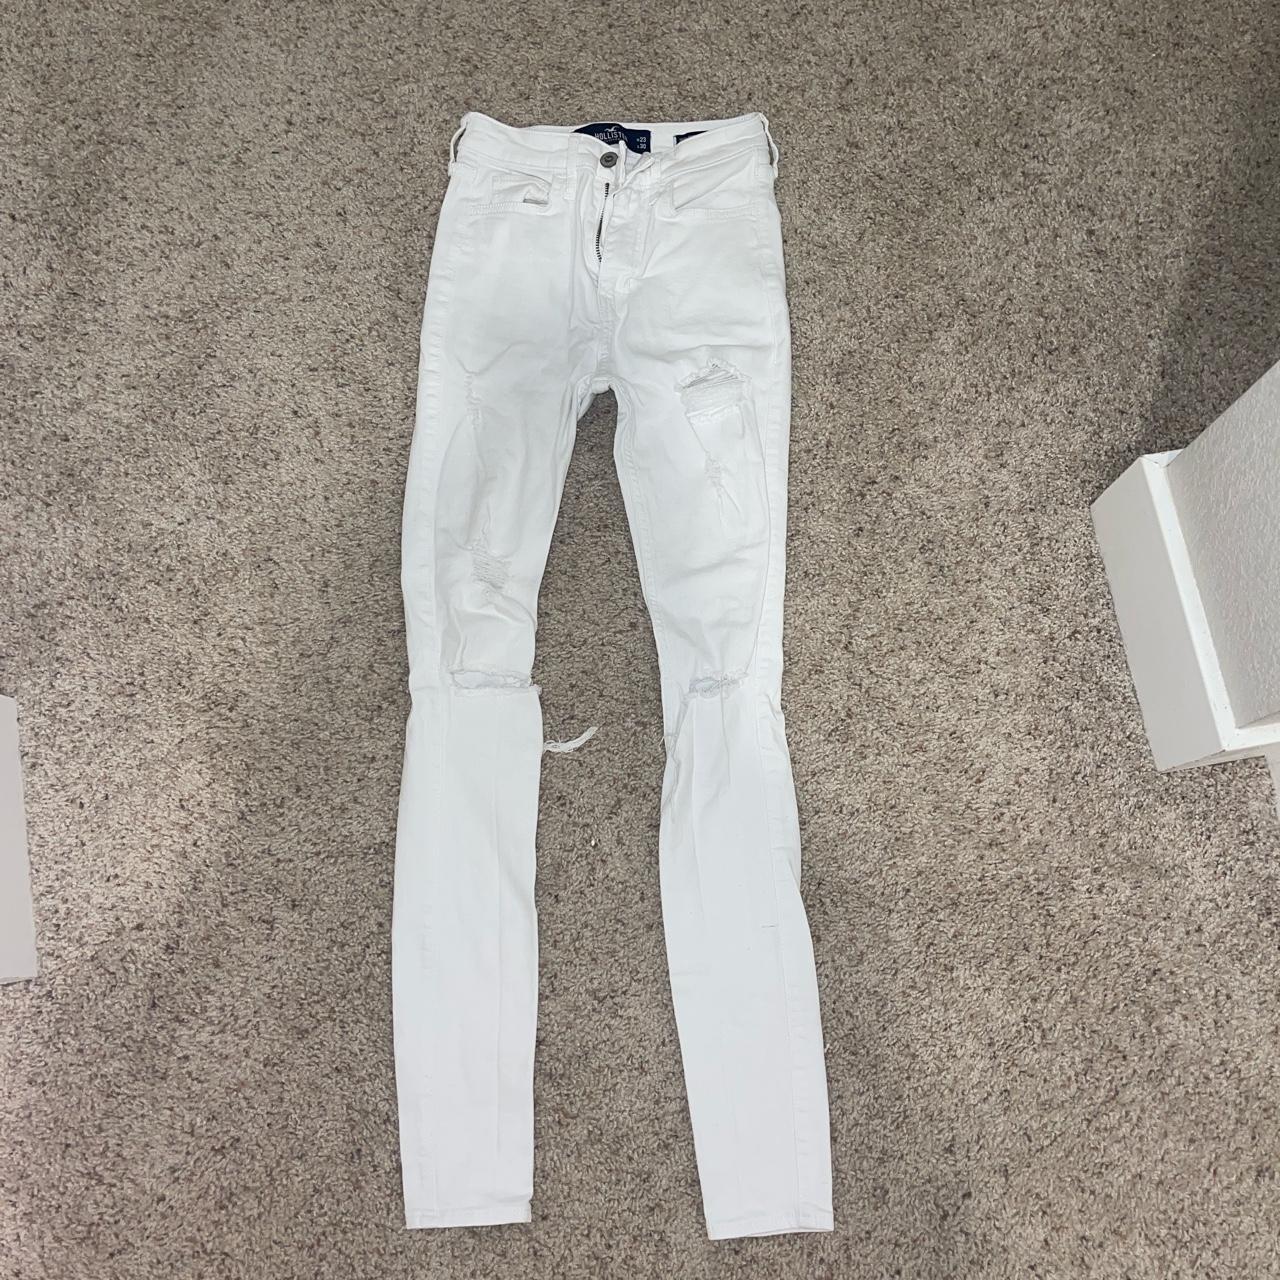 Hollister White Mid Rise Skinny Jeans ❤️🚨FREE - Depop